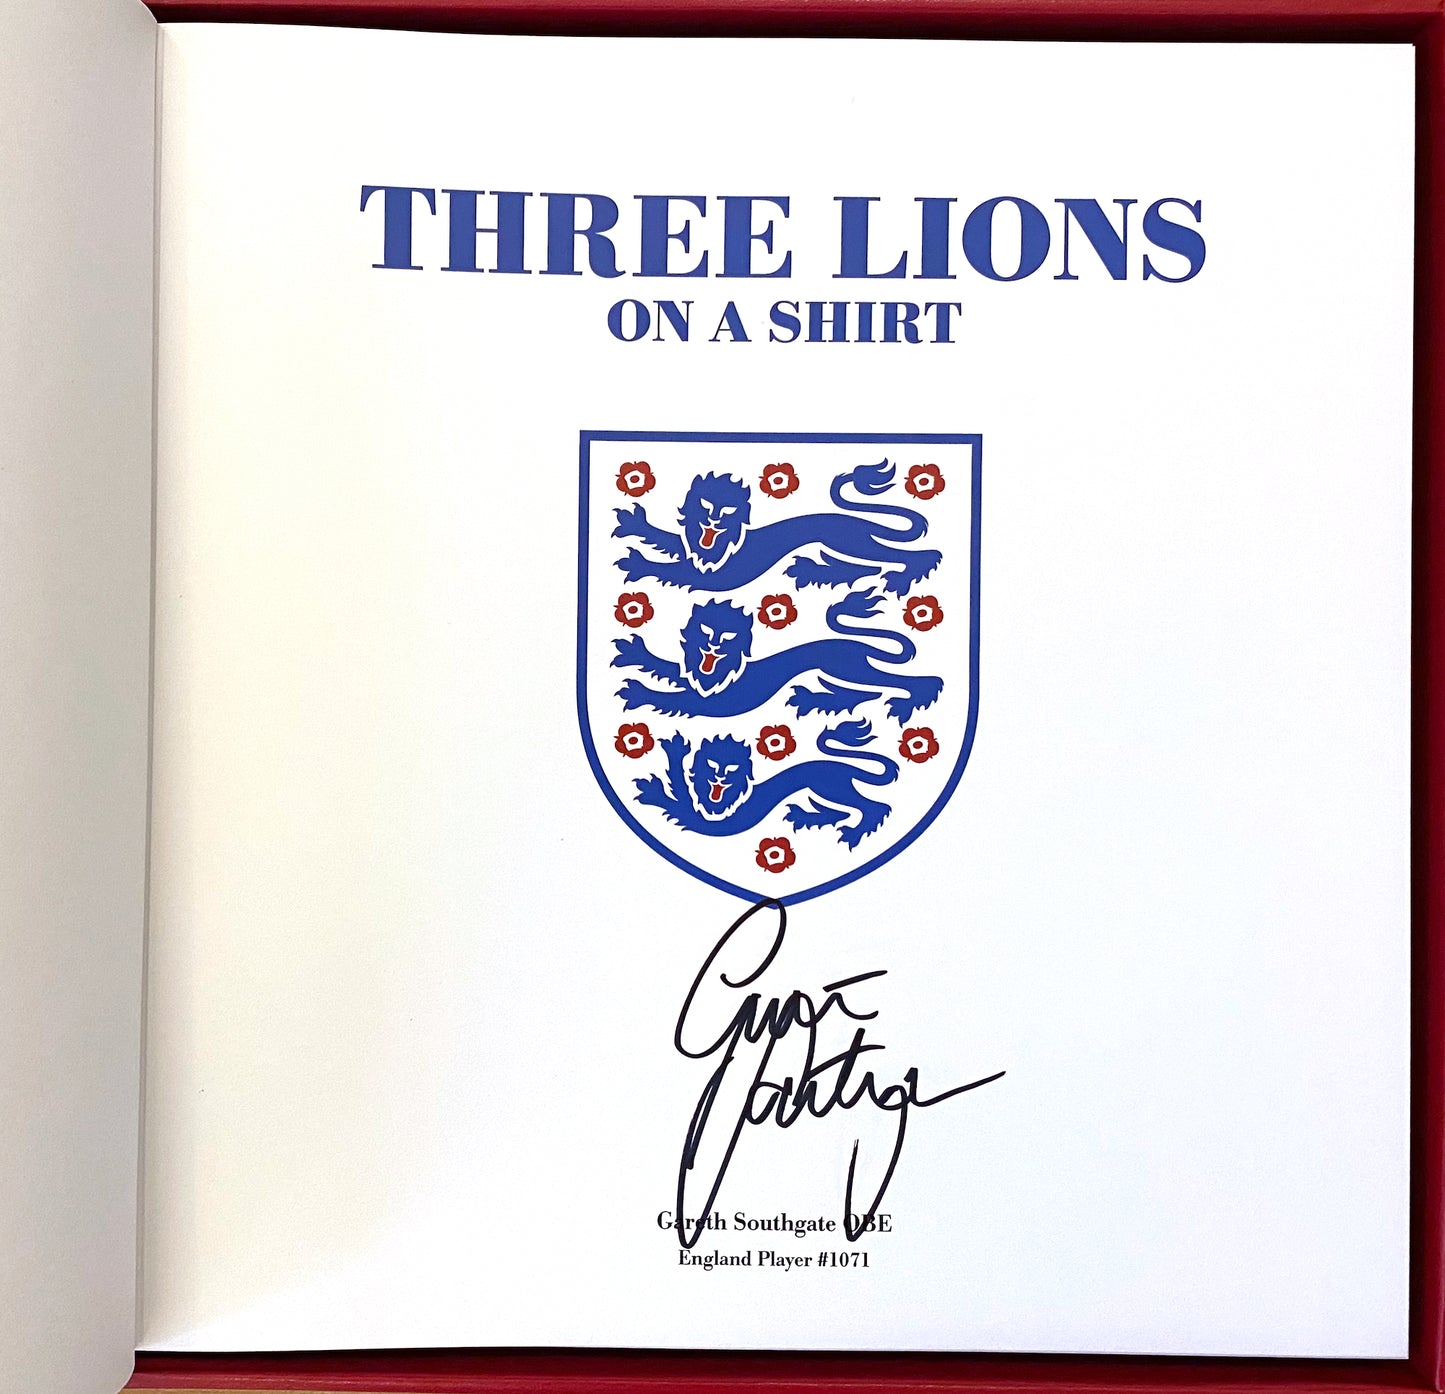 Three Lions On A Shirt - Manager's Edition - Signed by Gareth Southgate *Low Stock*